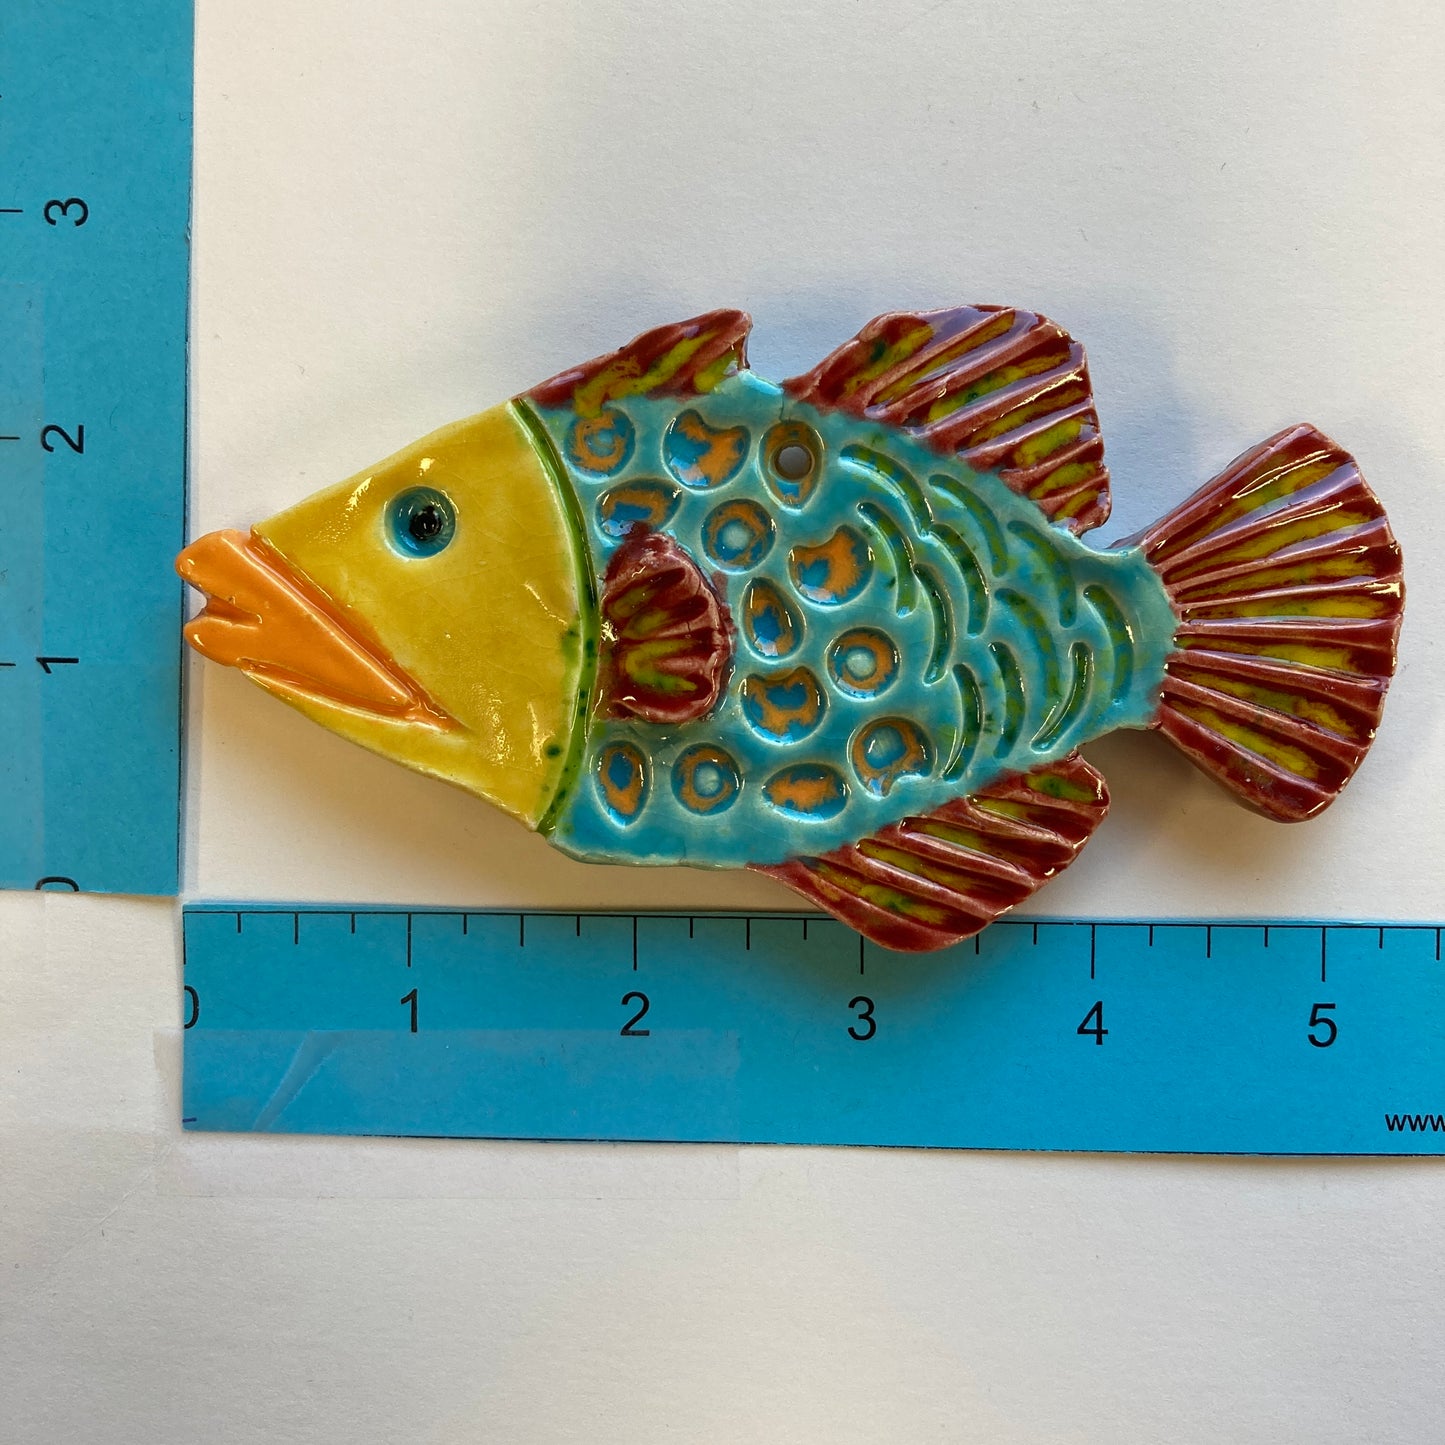 WATCH Resources Art Guild - Ceramic Arts Handmade Clay Crafts Fresh Fish 5-inch x 3-inch Glazed Fish made by Ryan Imhoff